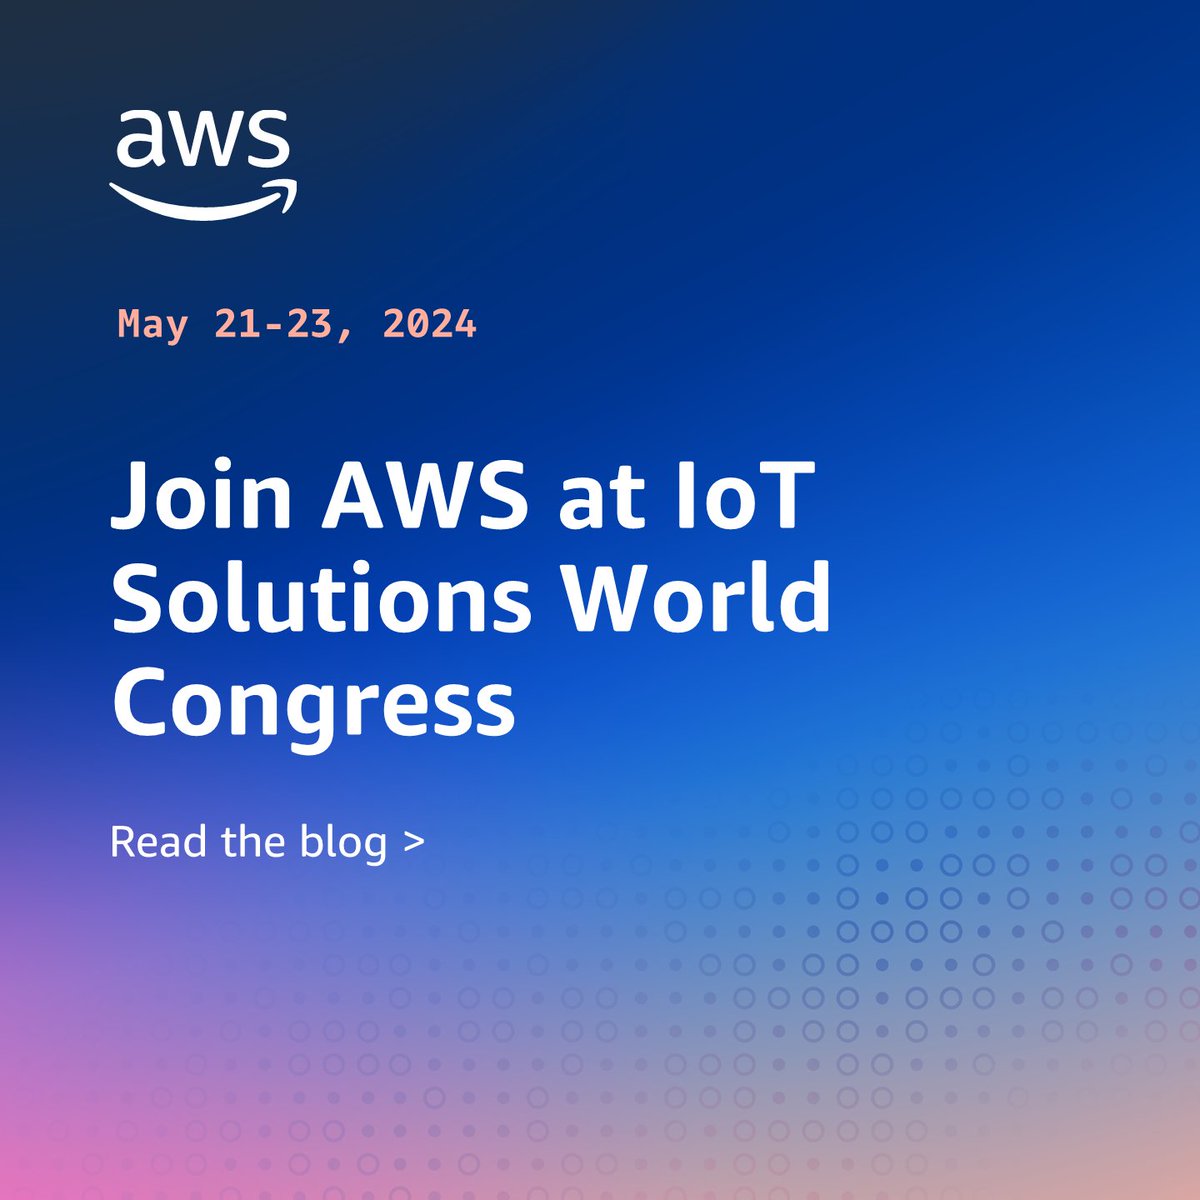 Discover the latest turnkey solutions spanning Industrial IoT, Connected Vehicles, Smart & Sustainable Buildings, & Smart Homes with #AWS at IoT Solutions World Congress. 🏭🚗🏠 Read the VP of #IoT at AWS, Yasser Alsaied's sneak peek of #IOTSWC24: 🔗 go.aws/3QFz5to